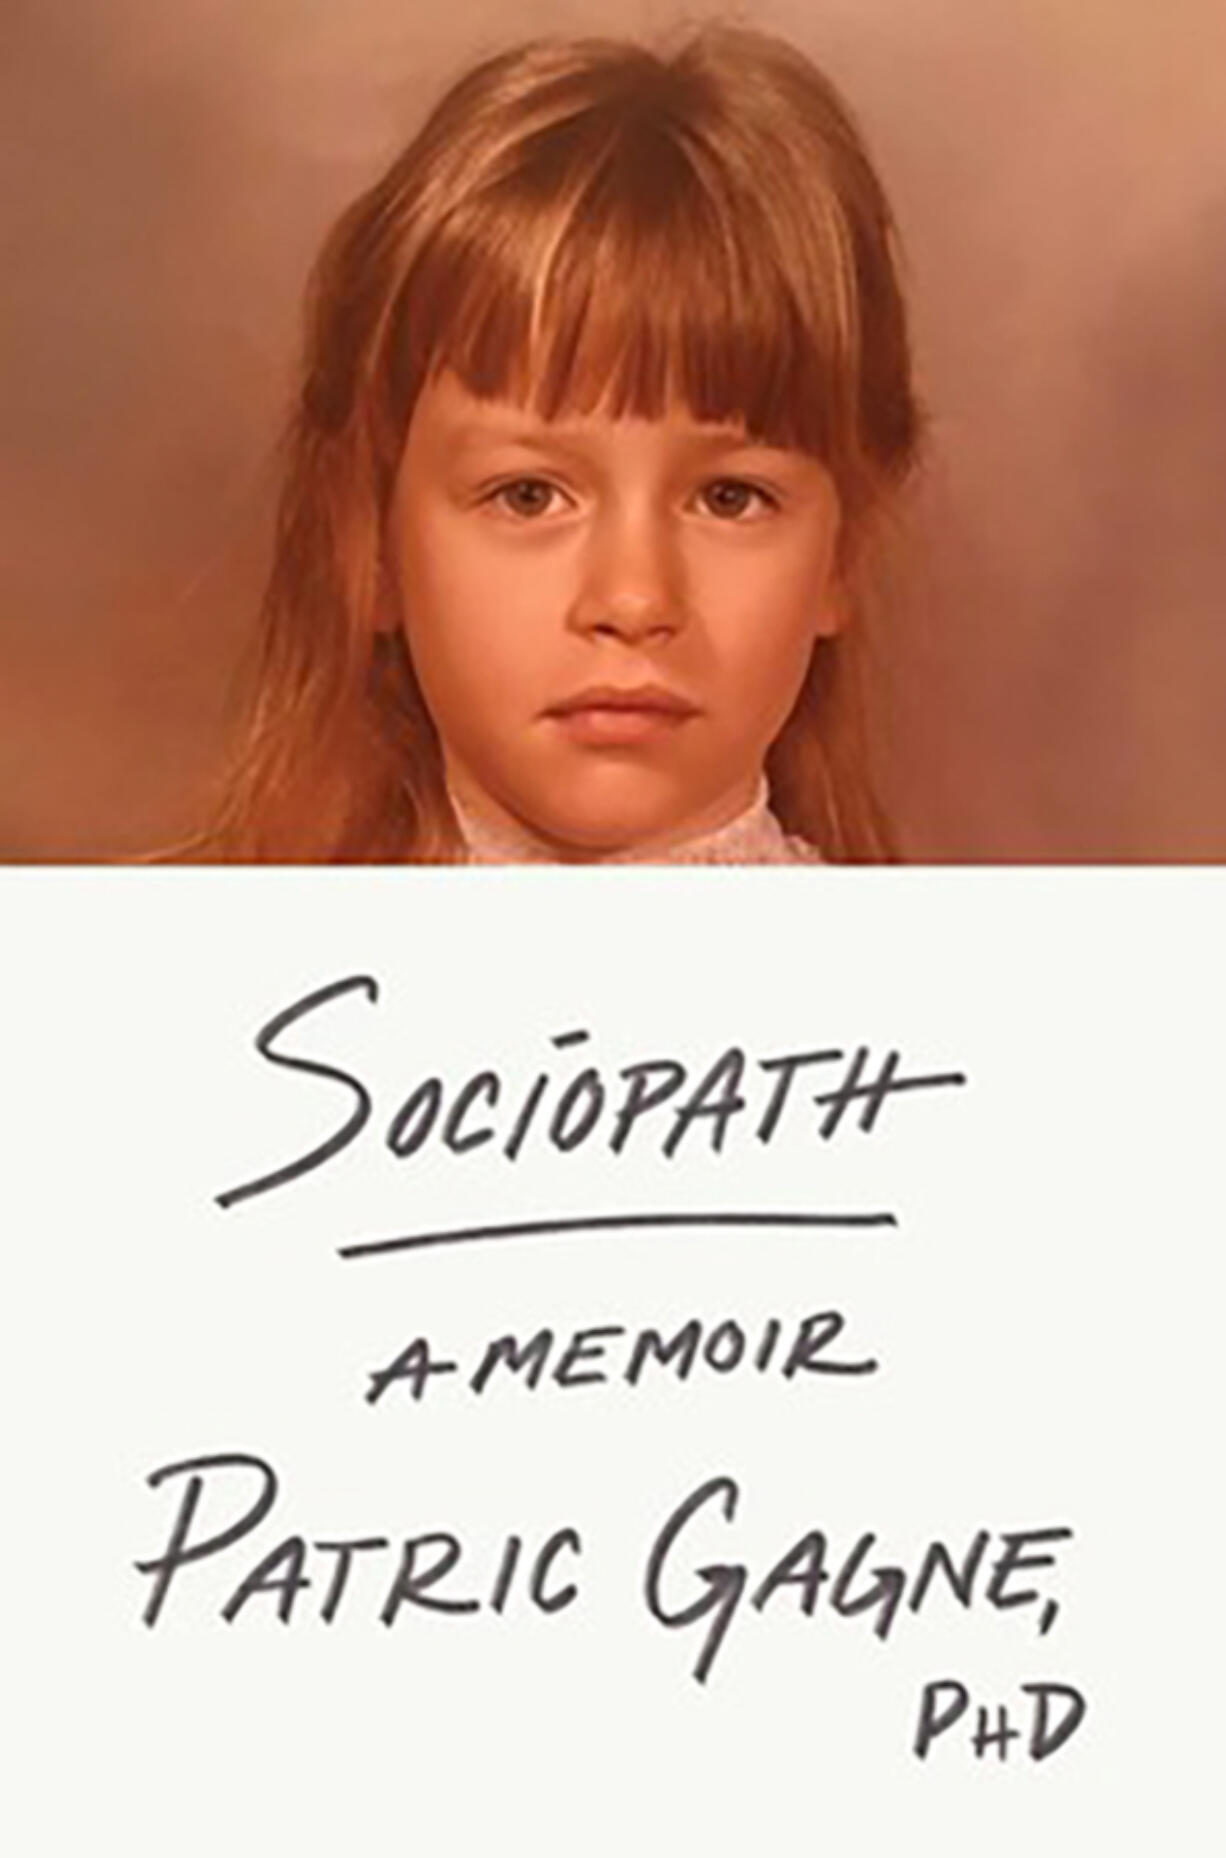 Patric Gagne is the author of &ldquo;Sociopath,&rdquo; published by Simon &amp; Schuster (Simon &amp; Schuster)